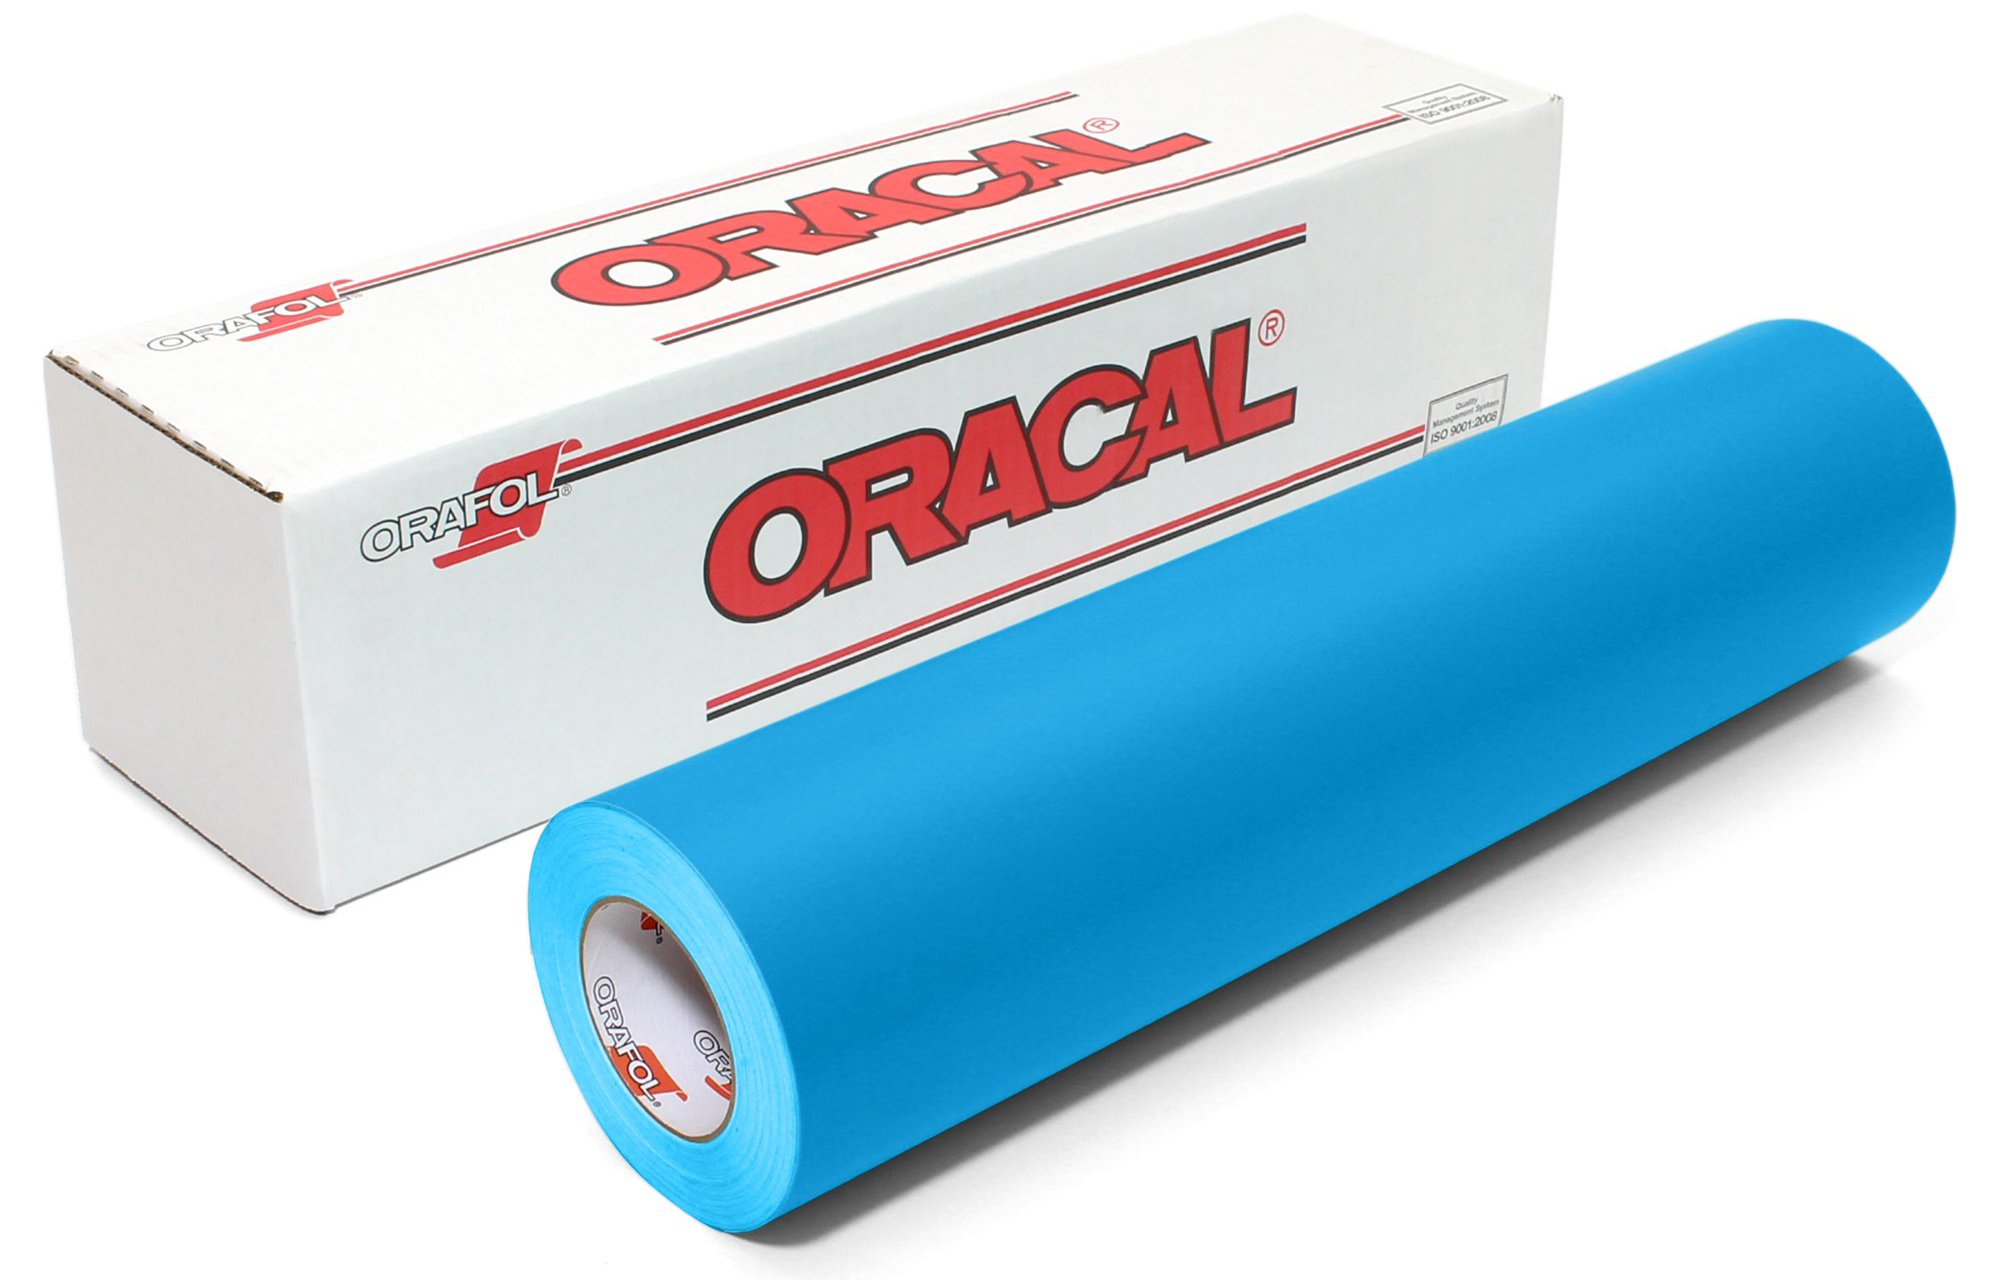 30IN LIGHT BLUE 631 EXHIBITION CAL - Oracal 631 Exhibition Calendered PVC Film